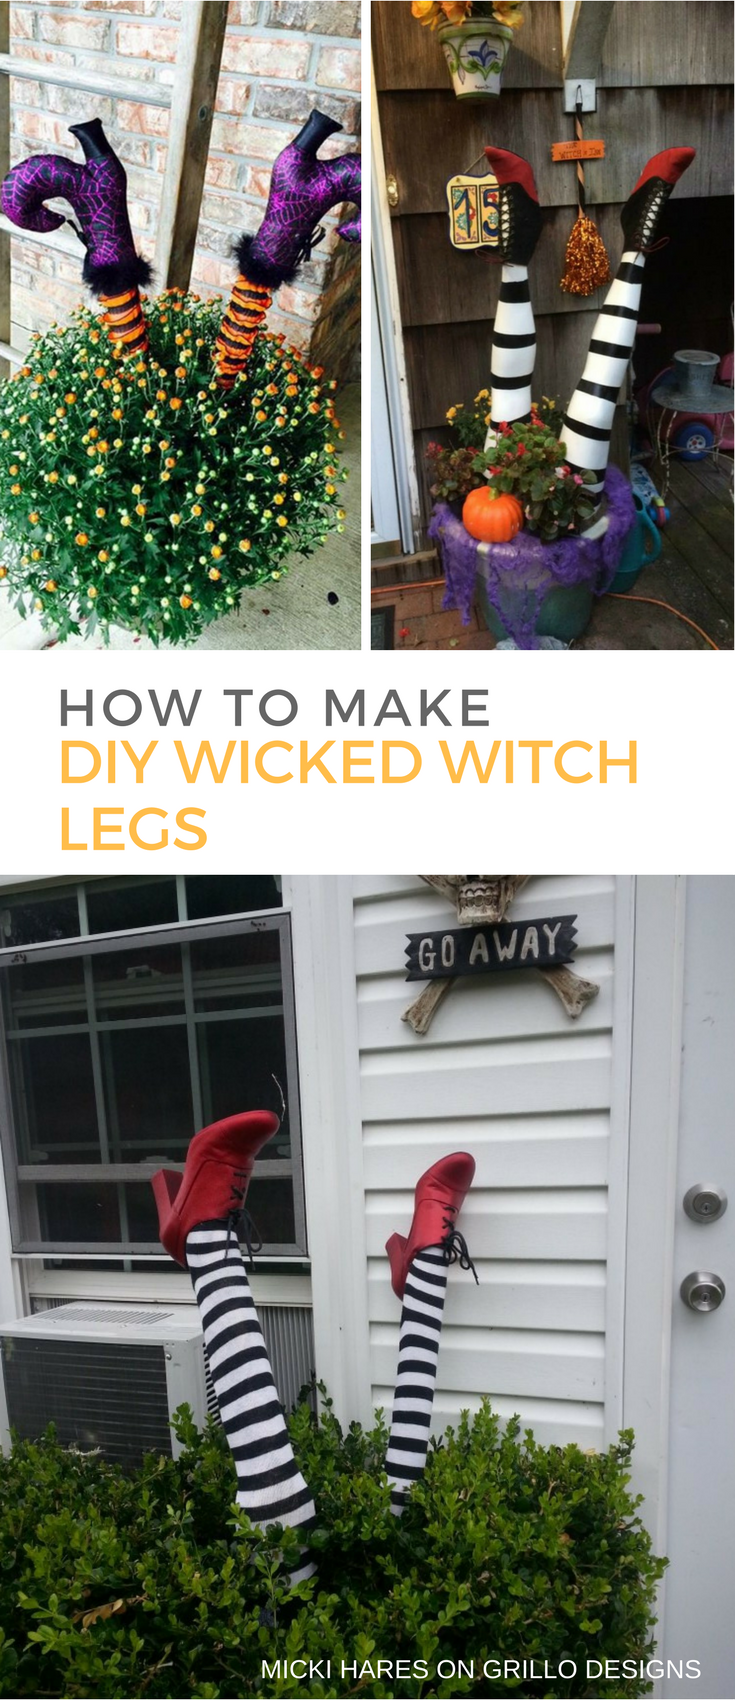 How to Make DIY Wicked Witch Legs Final Image